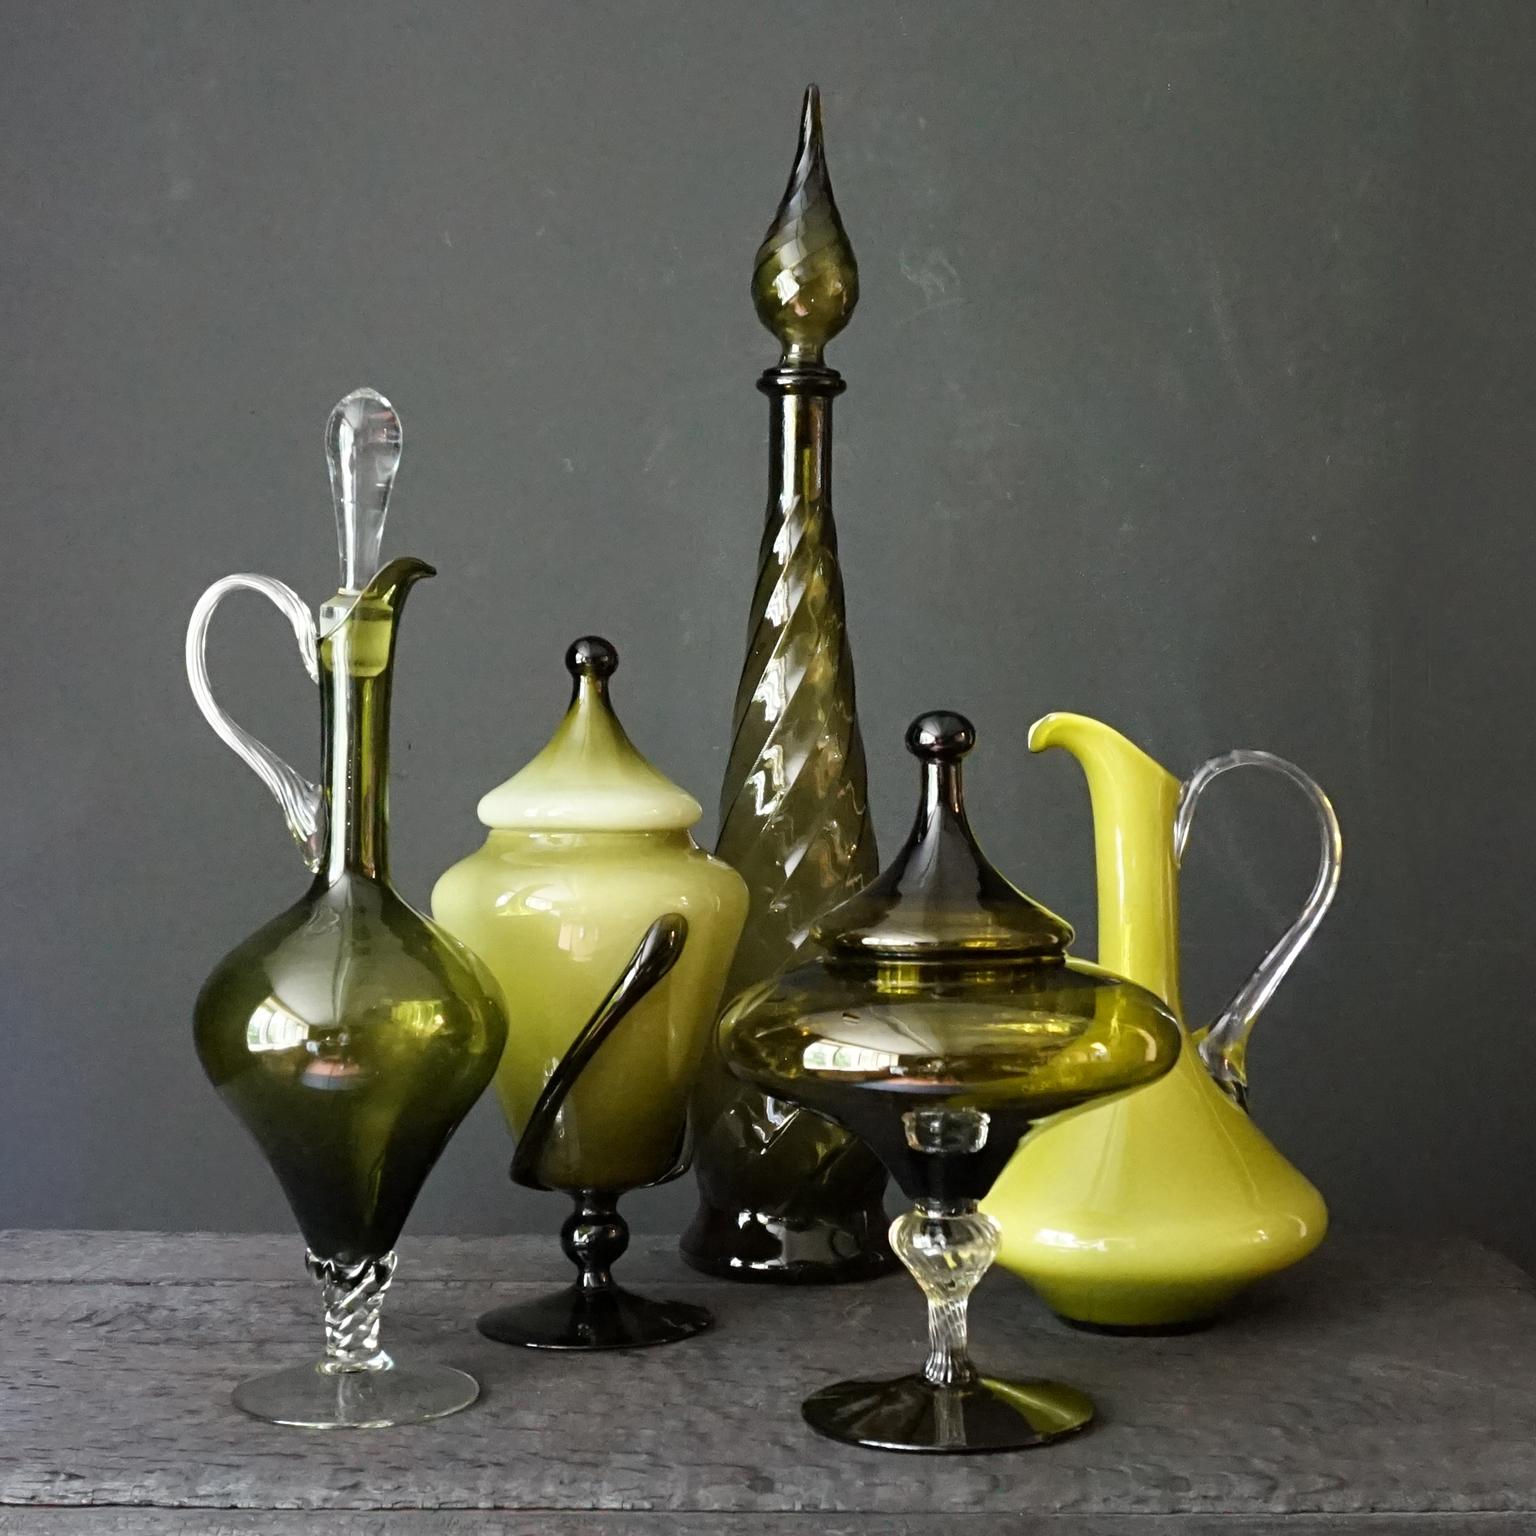 Very decorative olive green set of five different size Italian blown and pressed glass bottles.
One high pressed clear glass genie bottle, two blown glass carafes and two blown glass apothecary or candy jars.

Mention Italian glass and probably